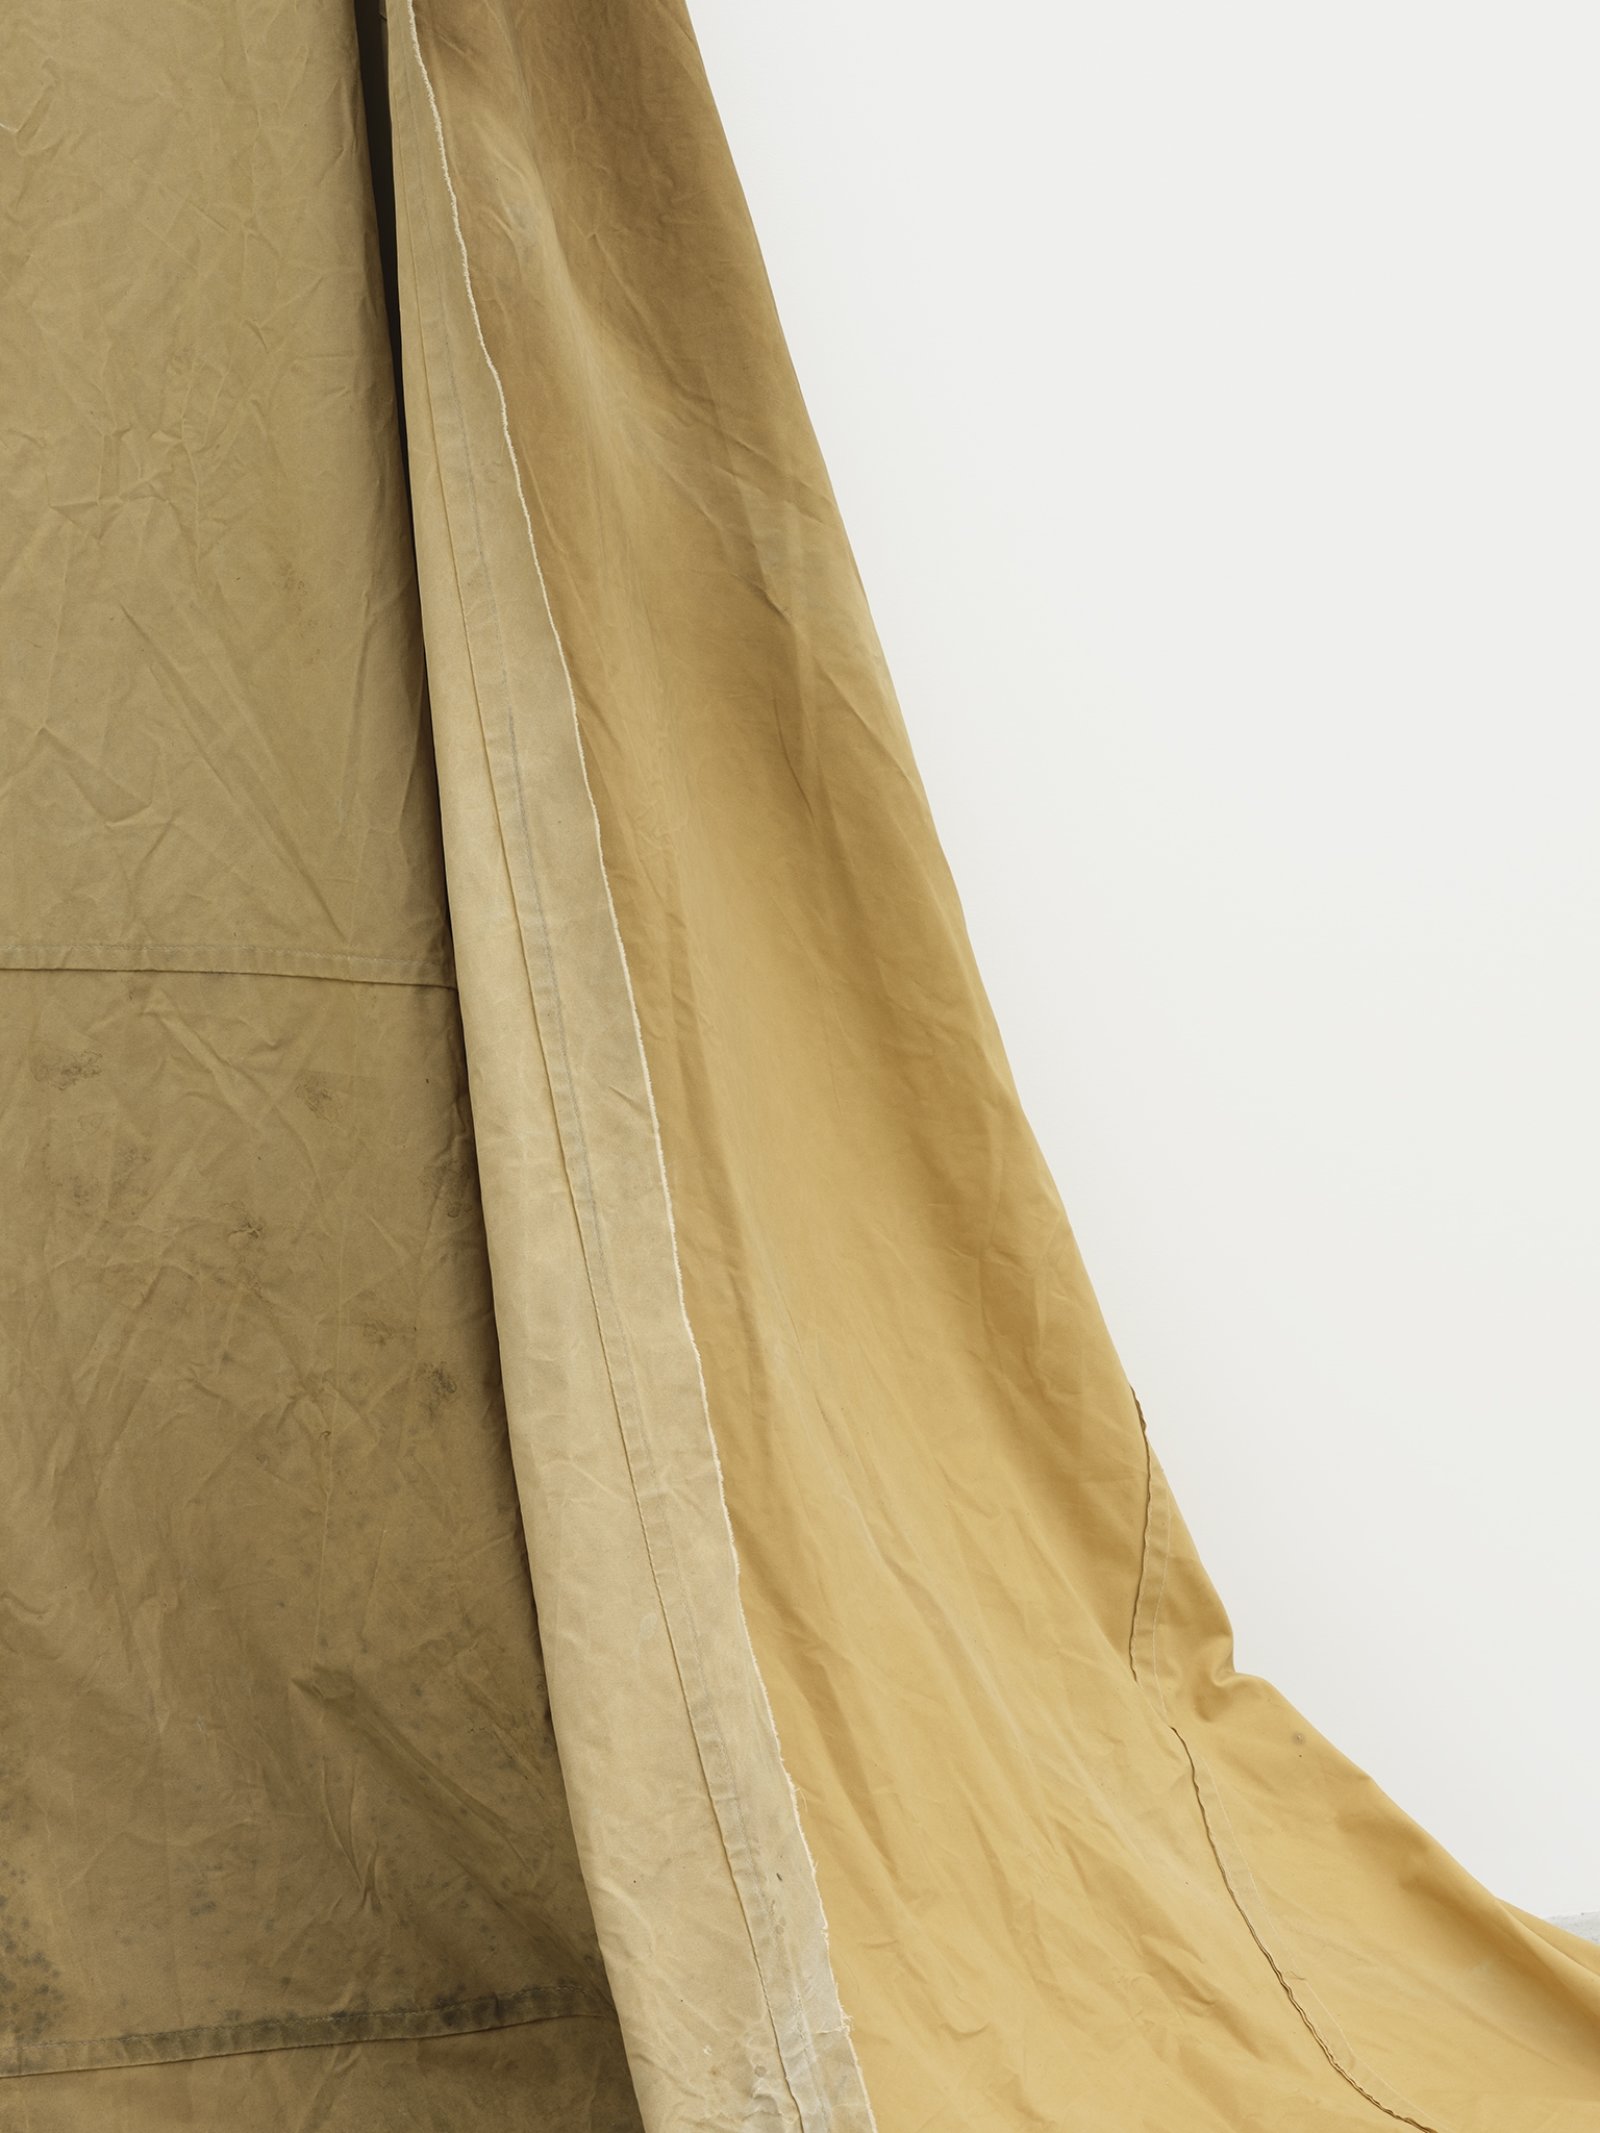 Duane Linklater, a gift from Doreen (detail), 2016–2019, hand-dyed canvas, tipi canvas, blueberry extract, grommets, nails, 108 x 270 x 123 in. (274 x 686 x 312 cm)